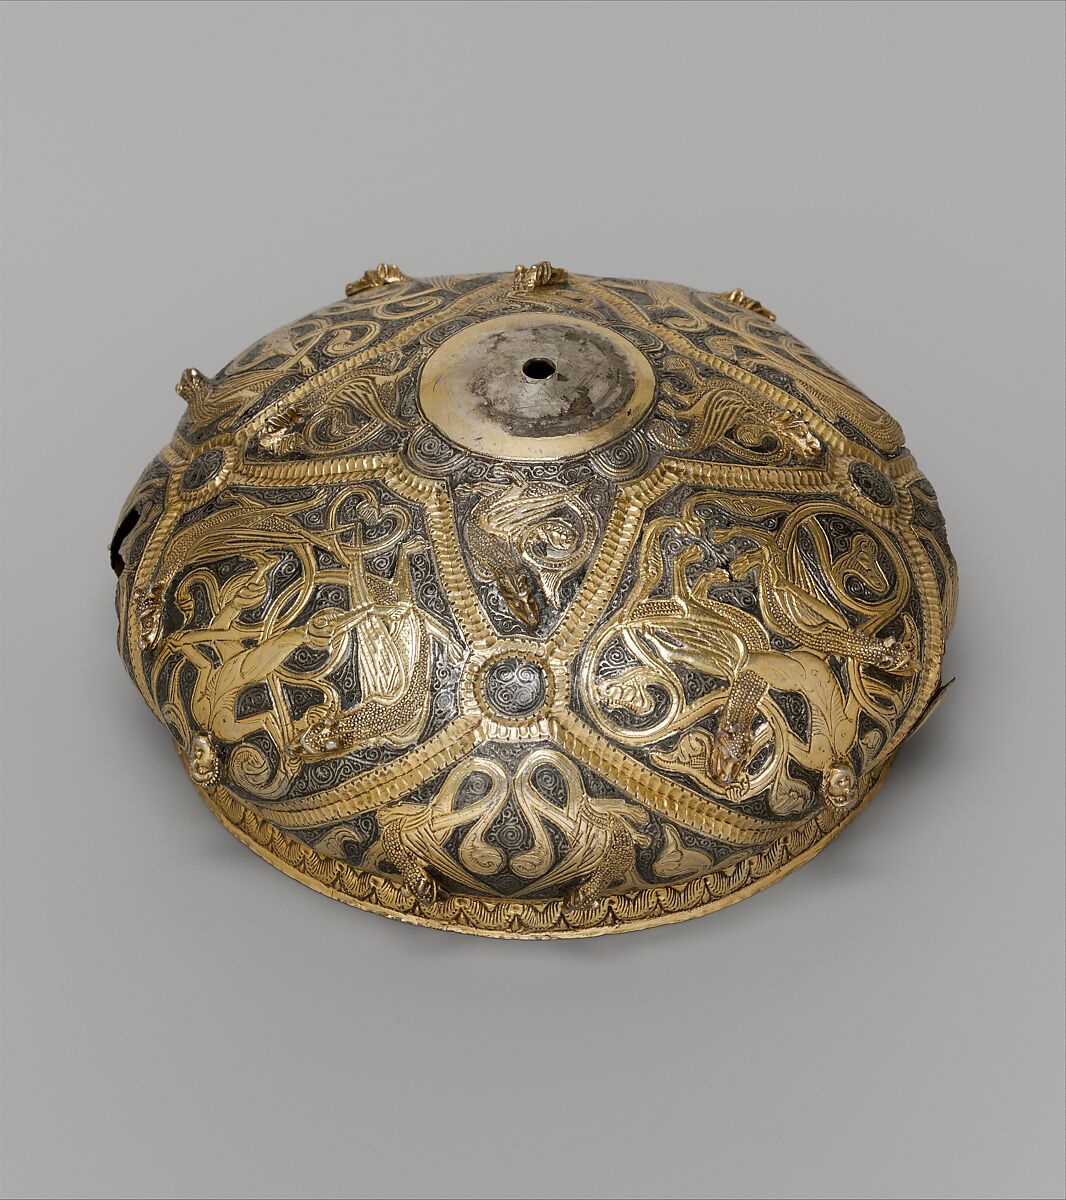 Bowl of a Drinking Cup, Silver, silver gilt, and niello, British or Scandinavian 